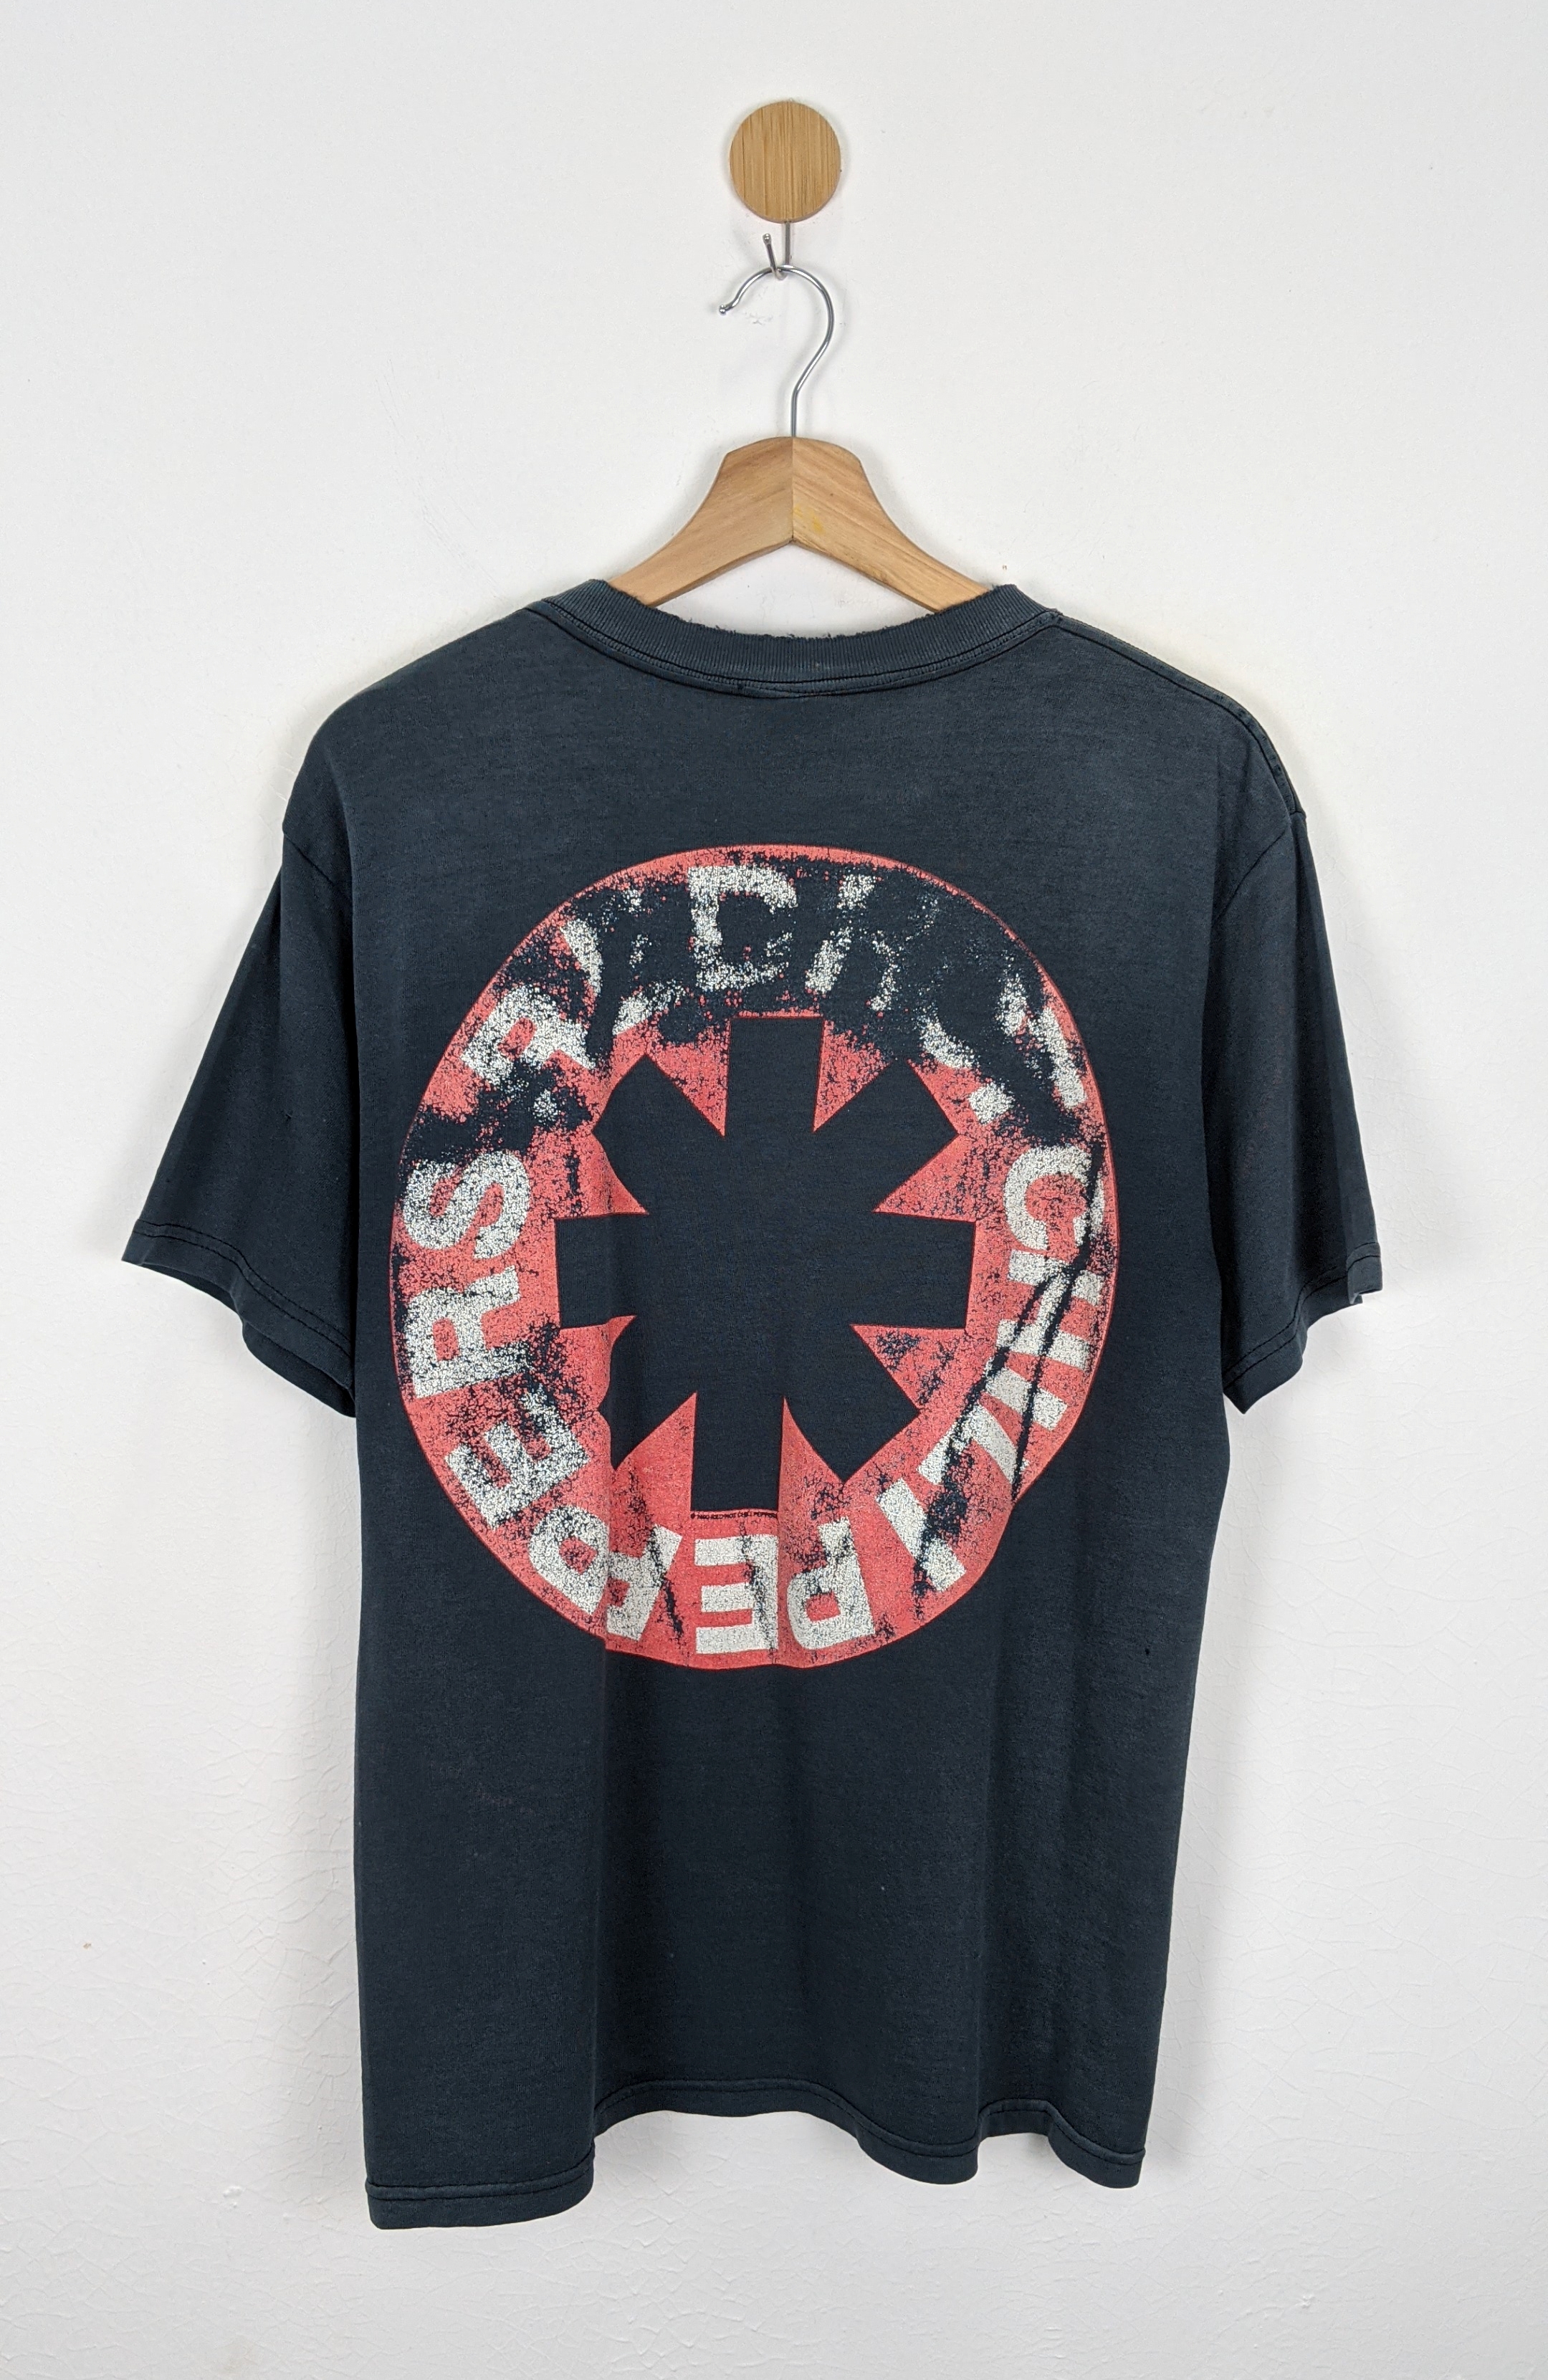 Vintage - Vintage 90s Red Hot Chili Peppers RHCP Picasso Art shirt